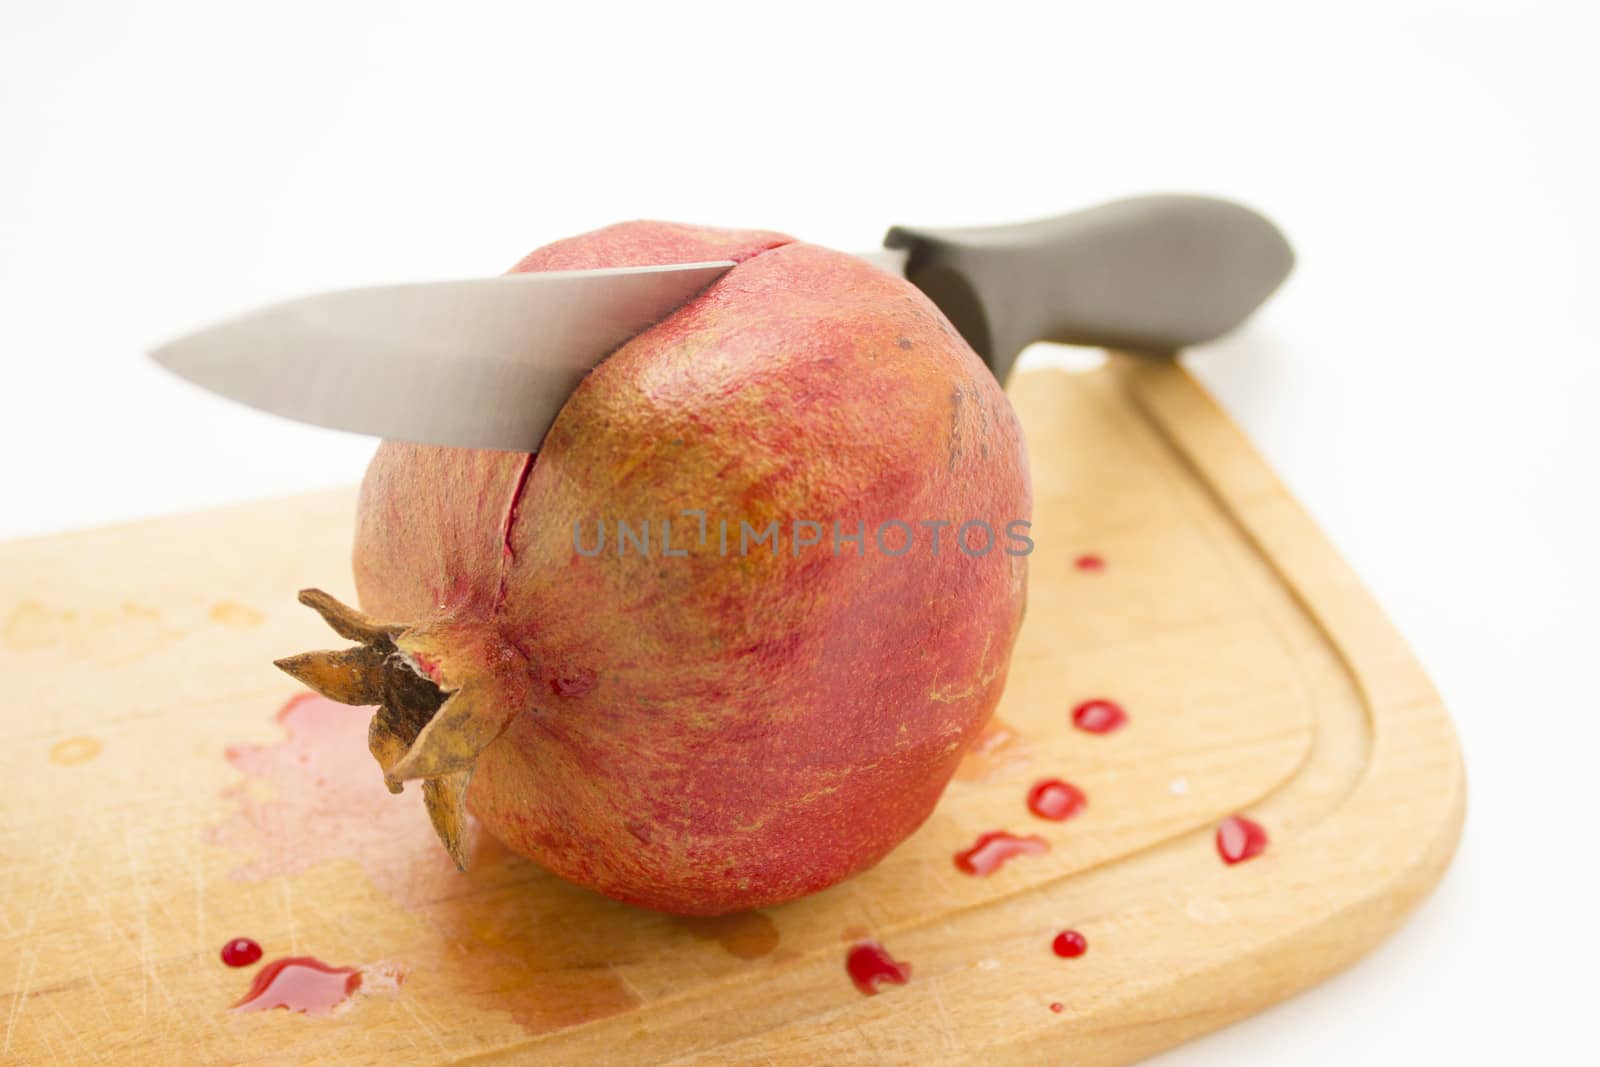 Pomegranate on a wooden cutting board with a knife inside.